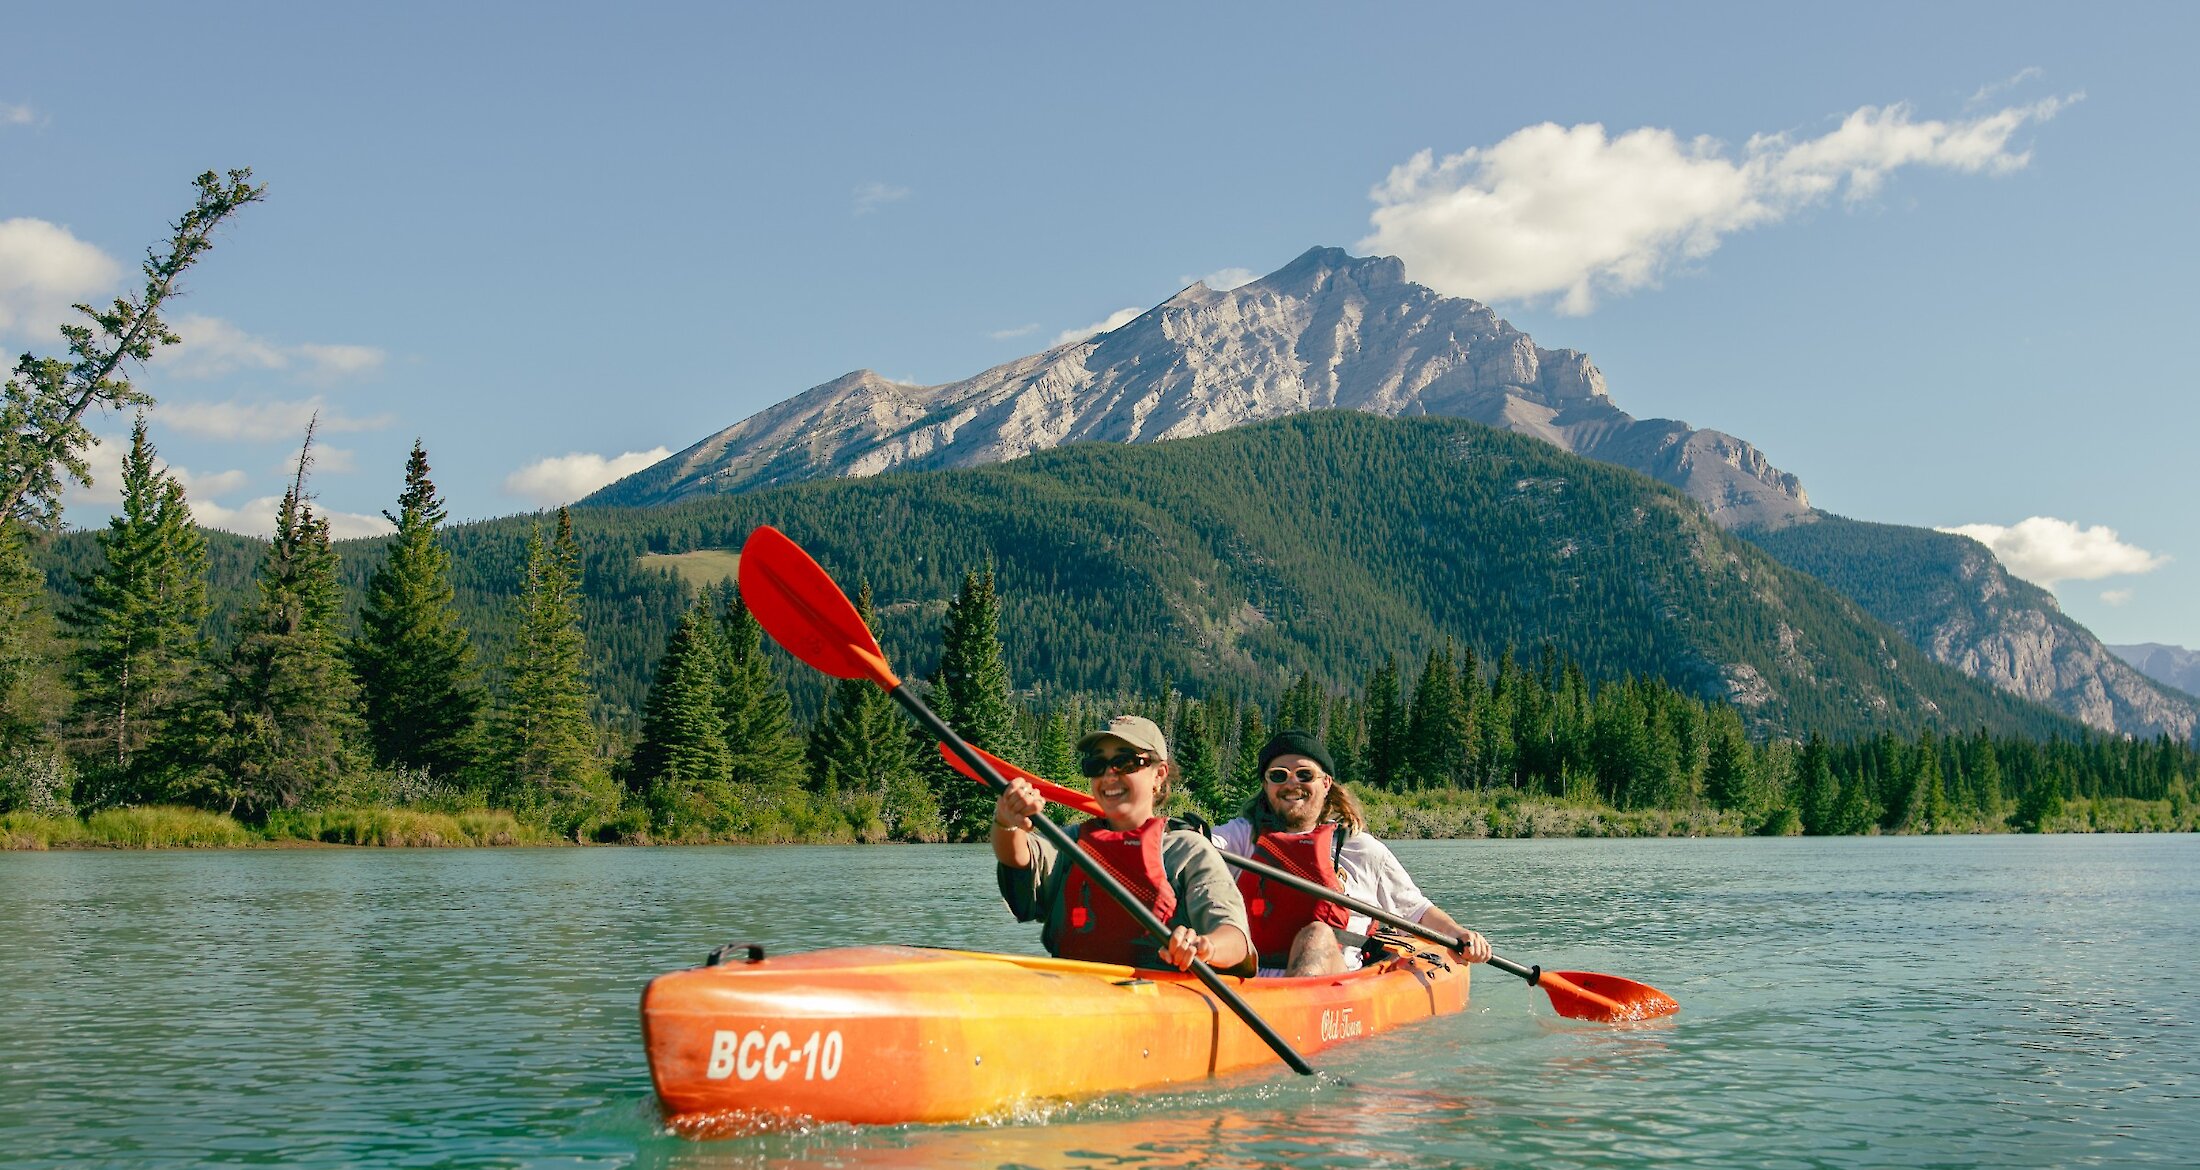 A couple of friends kayaking on the bow river in Banff